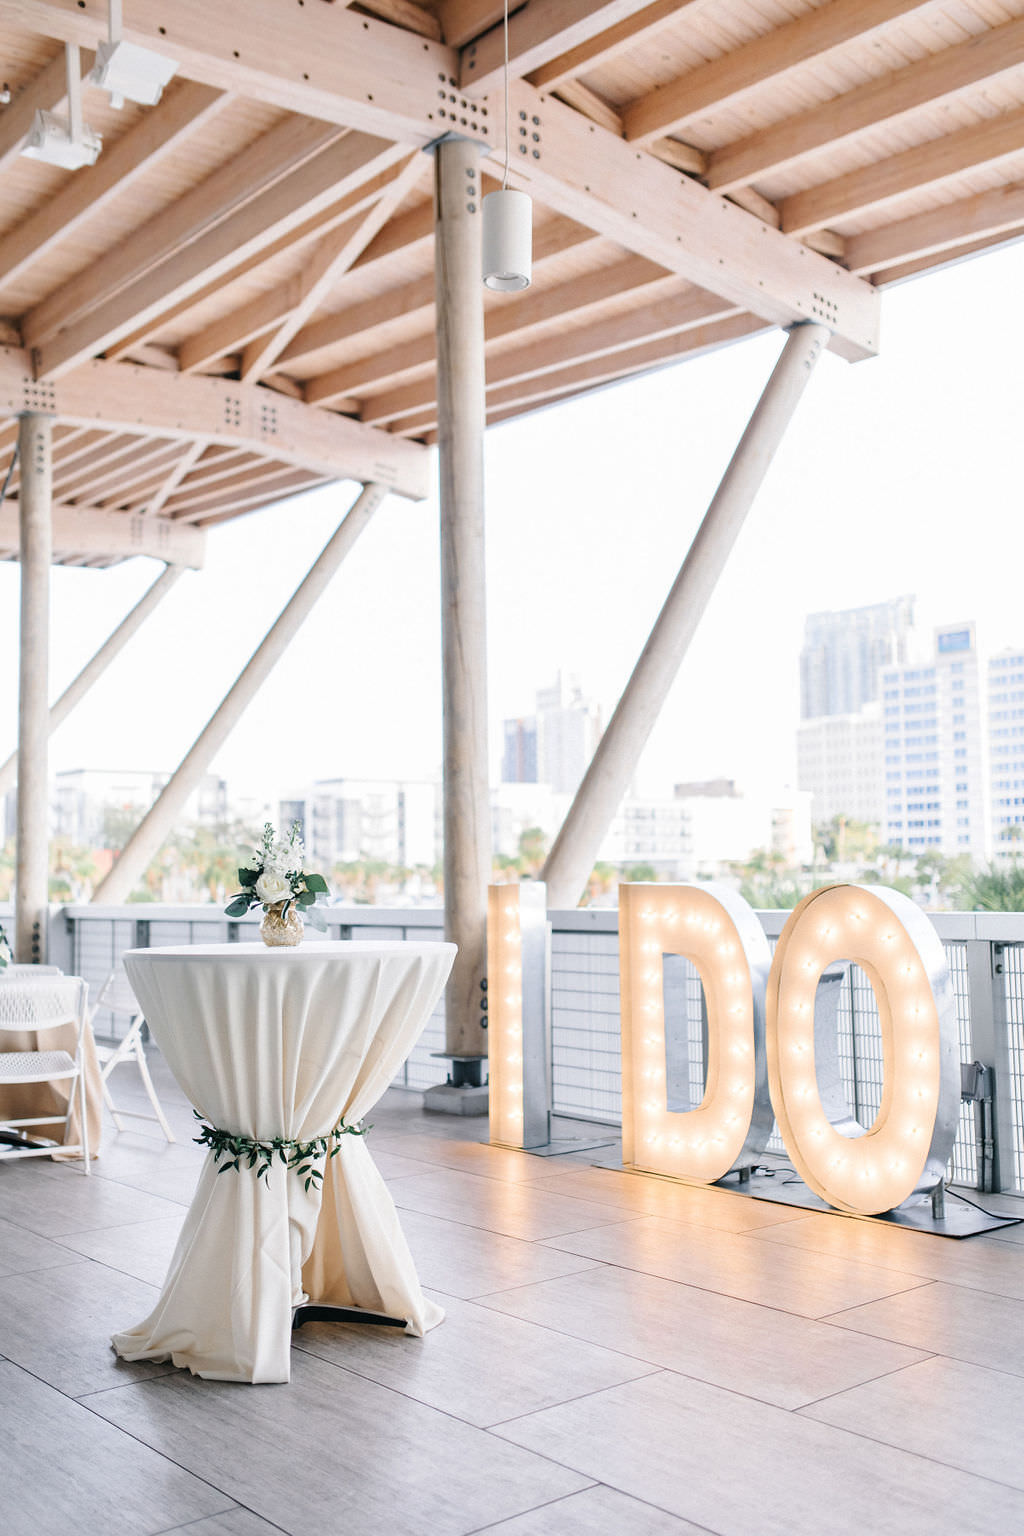 Timeless Tampa Bay Wedding Reception and Decor, Outdoor Waterfront Cocktail Hour with "I DO" Lights at Tampa River Center | Florida Wedding Planner UNIQUE Weddings and Events | A Chair Affair | Over The Top Linen Rentals